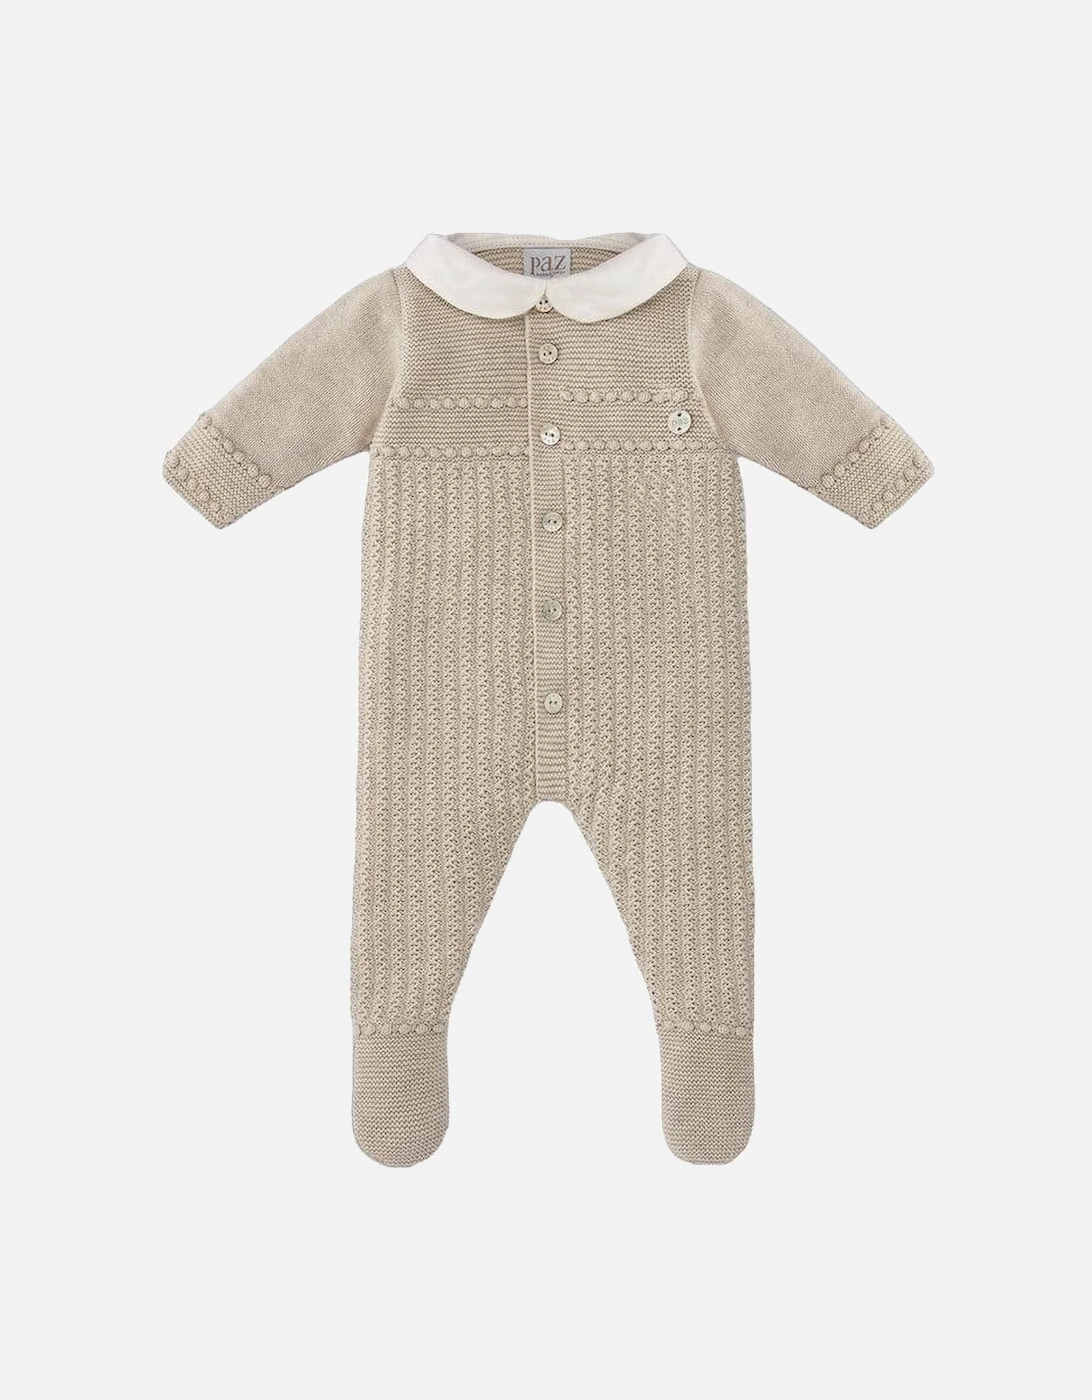 PAZ RODRIGUEZ Baby Boy's Baby Boys Beige Knitted All In One - Cream - Size: 3-6 months